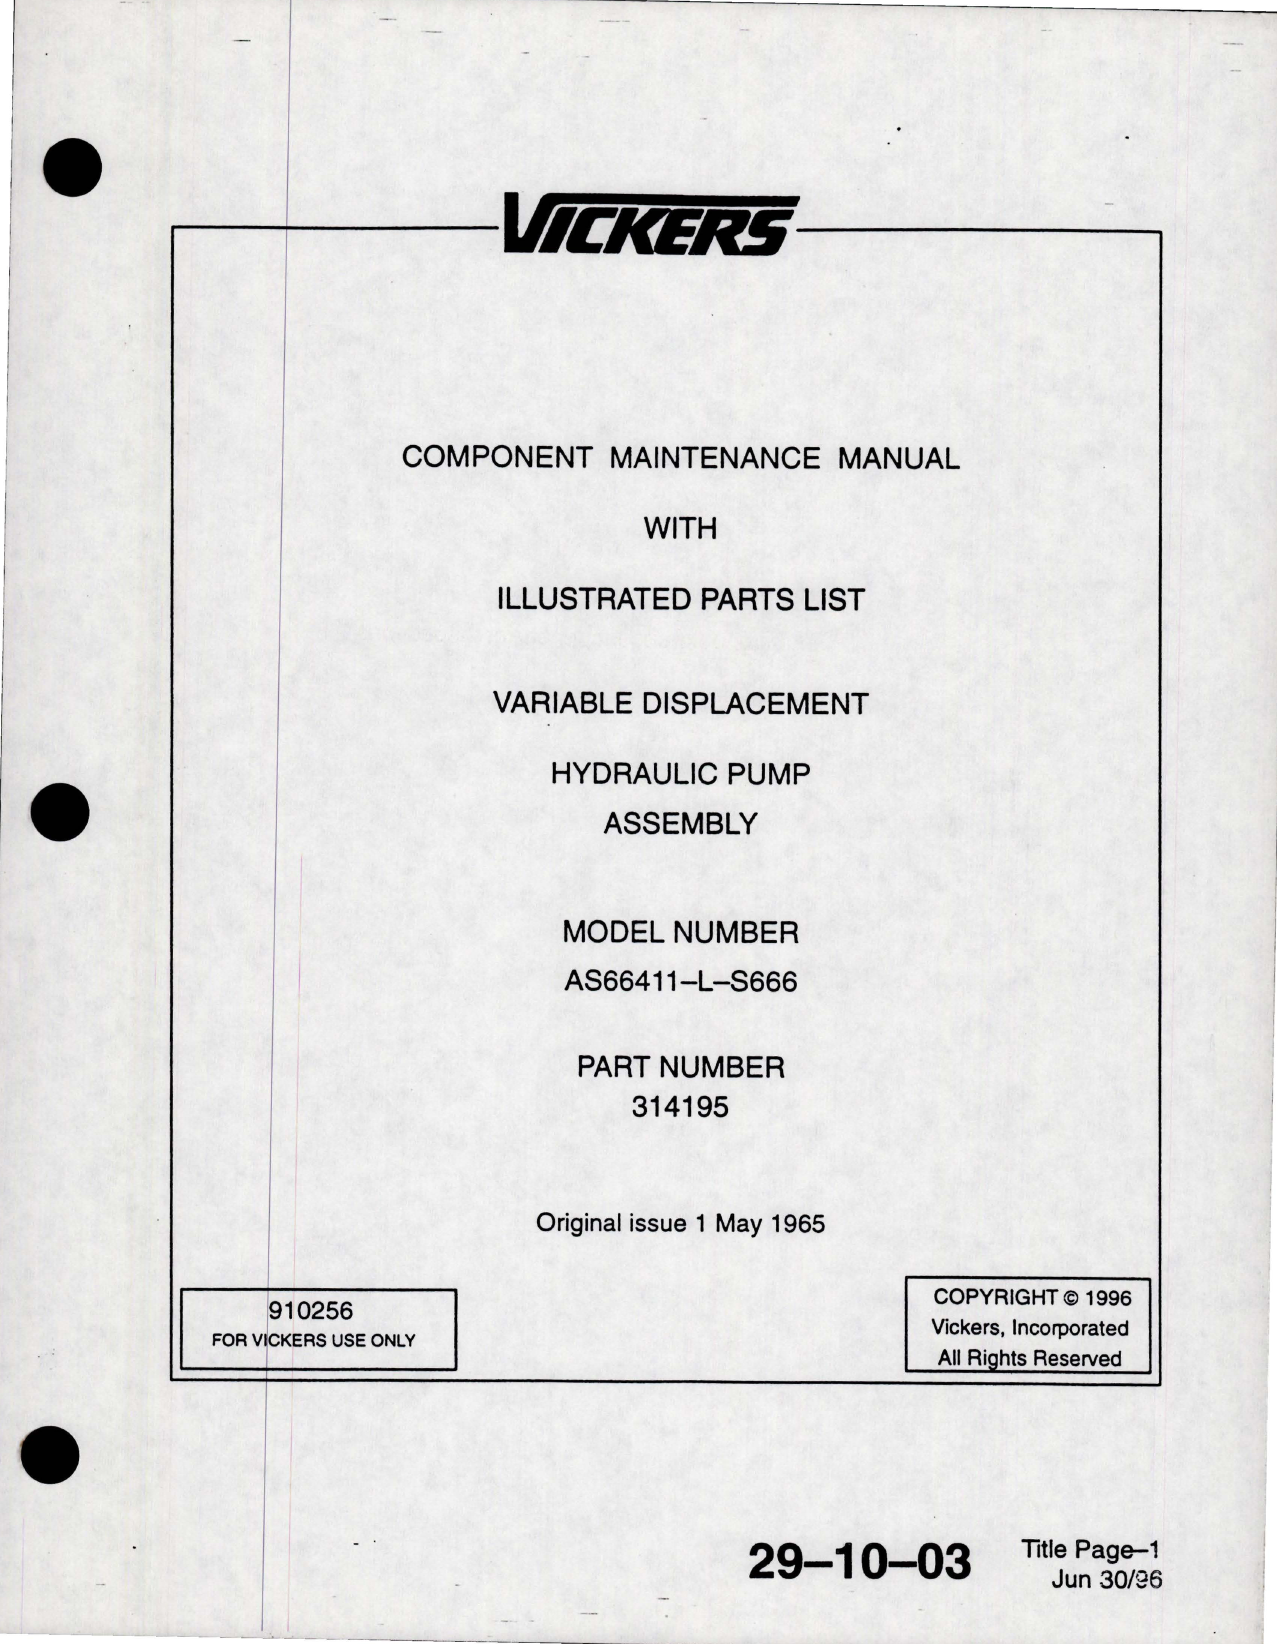 Sample page 1 from AirCorps Library document: Maintenance Manual with Parts List for Variable Displacement Hydraulic Pump Assembly - Model AS66411-L-S666 (Vickers